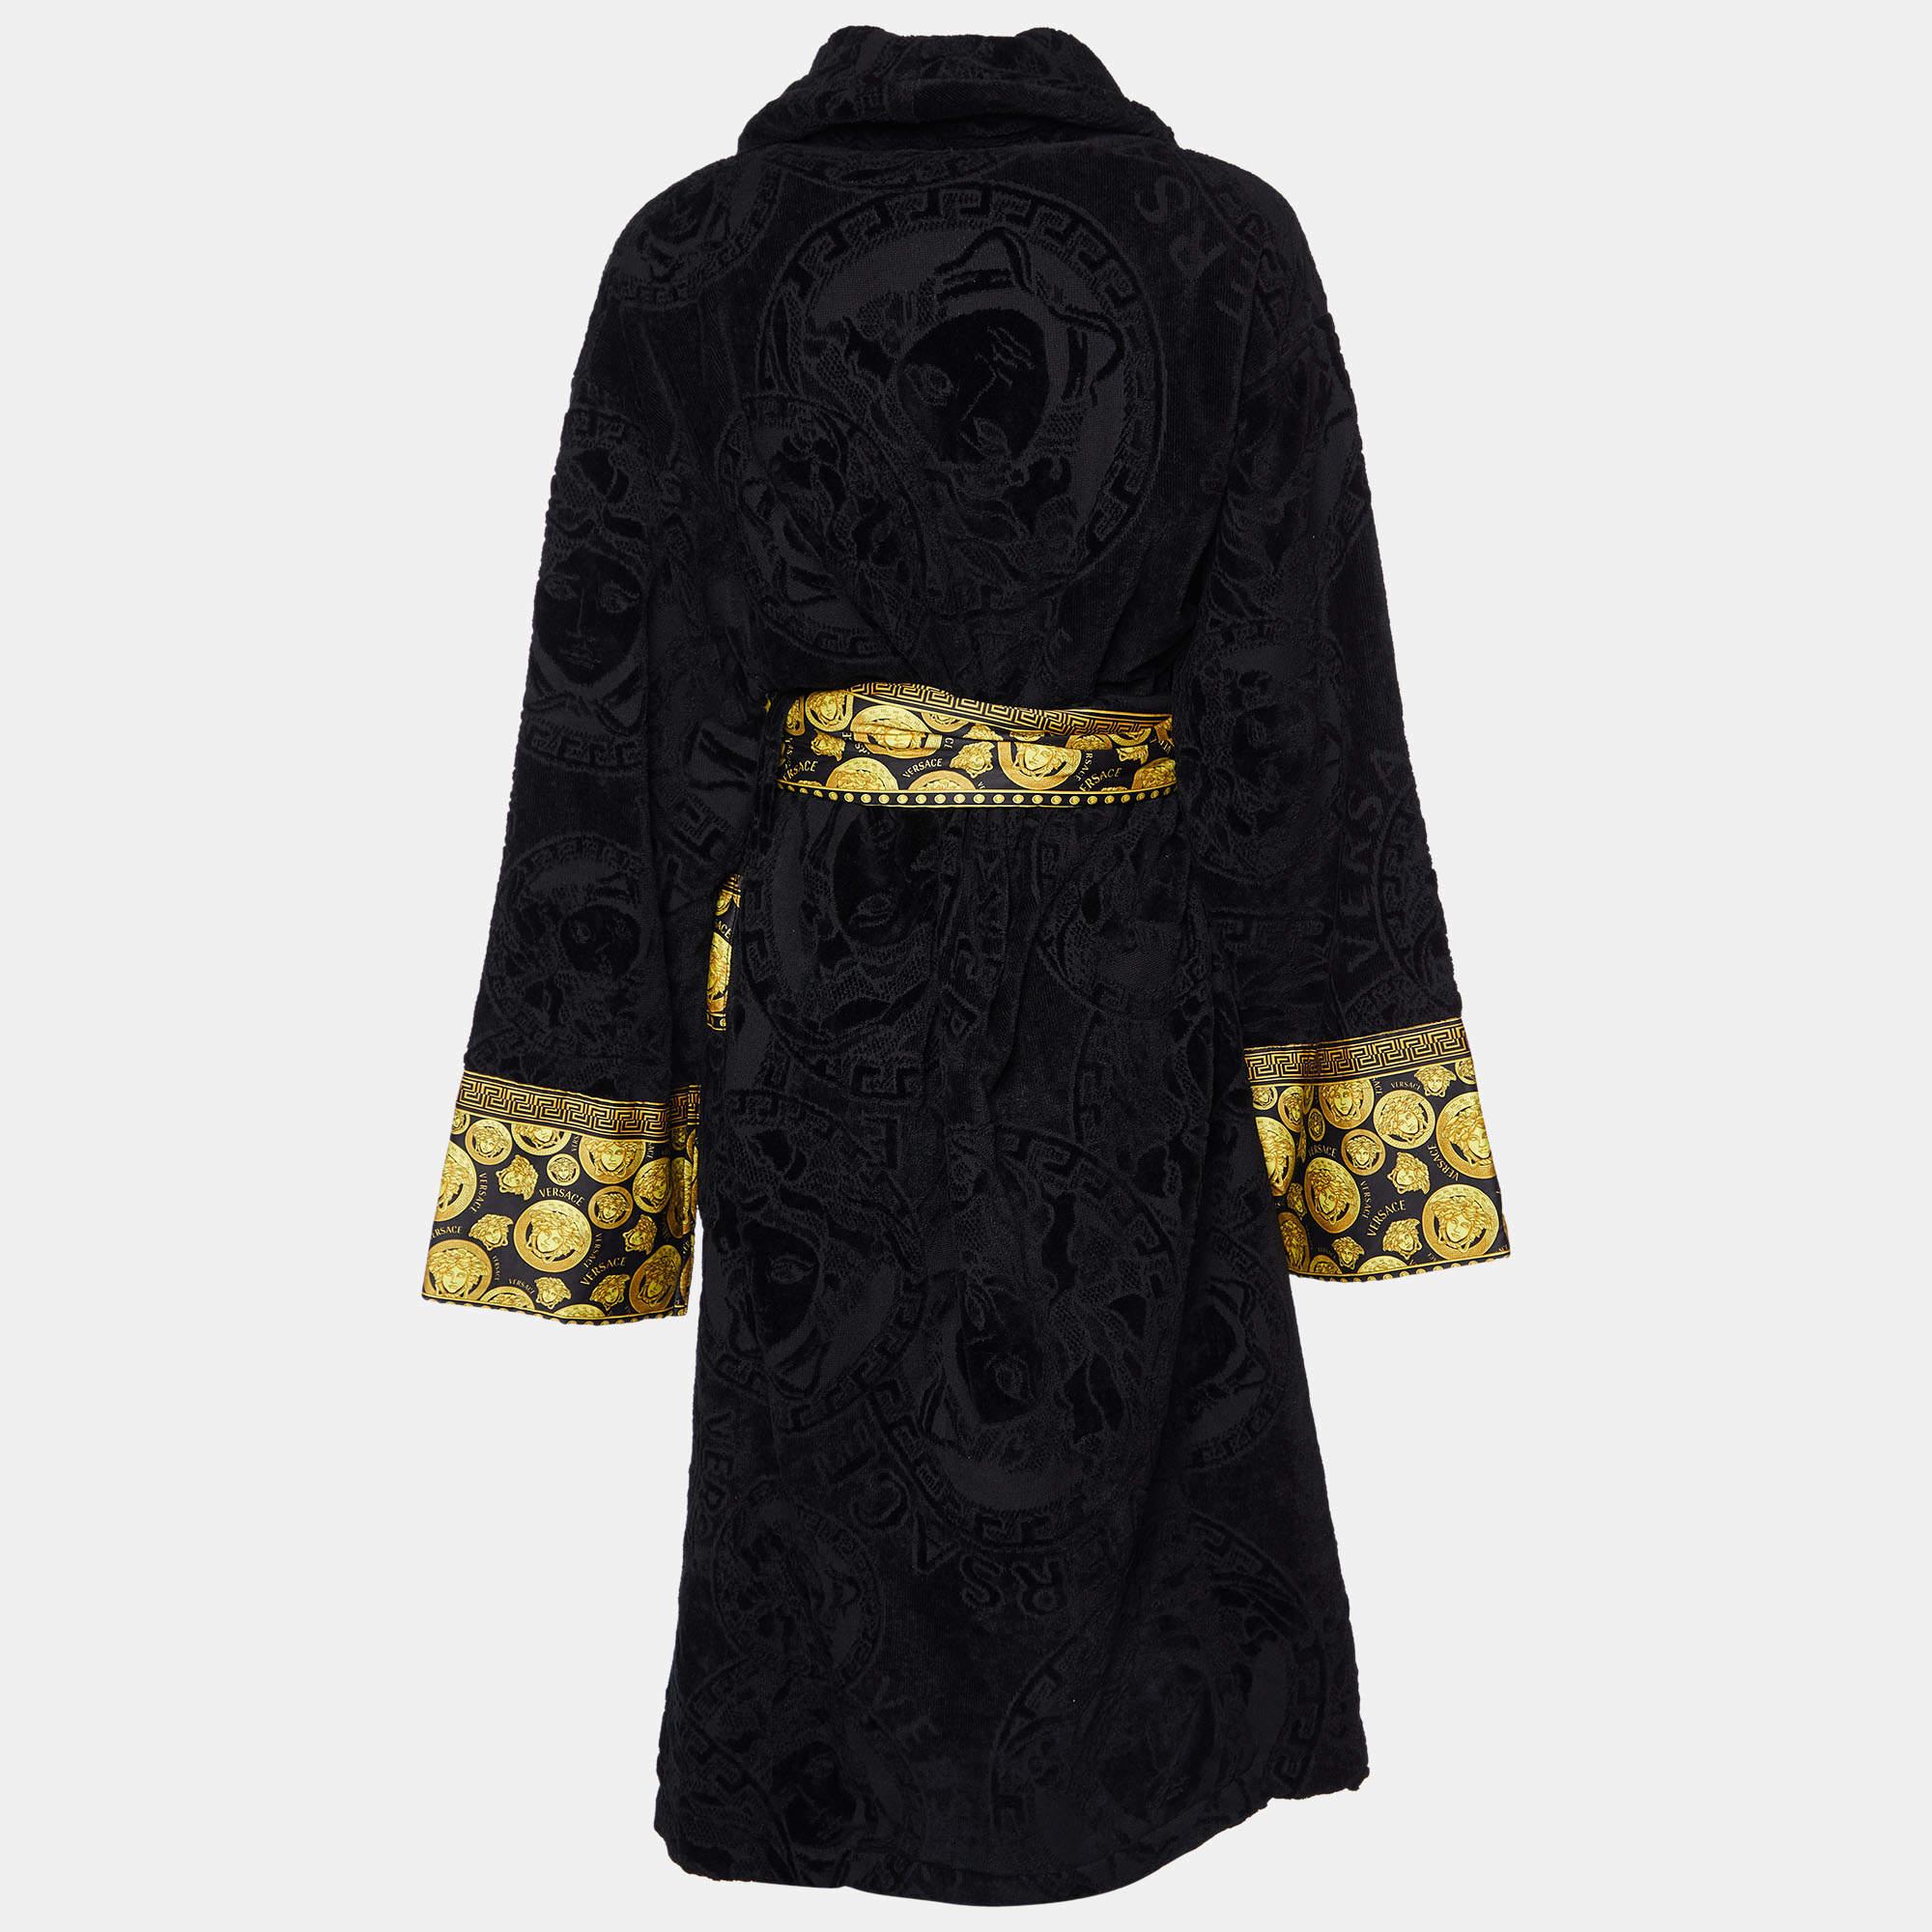 Indulge in luxury with the Versace bathrobe. Crafted from sumptuously soft terry cotton, adorned with the iconic Versace Baroque motif, and featuring a flattering tie-waist design, this bathrobe promises unparalleled comfort and style for your